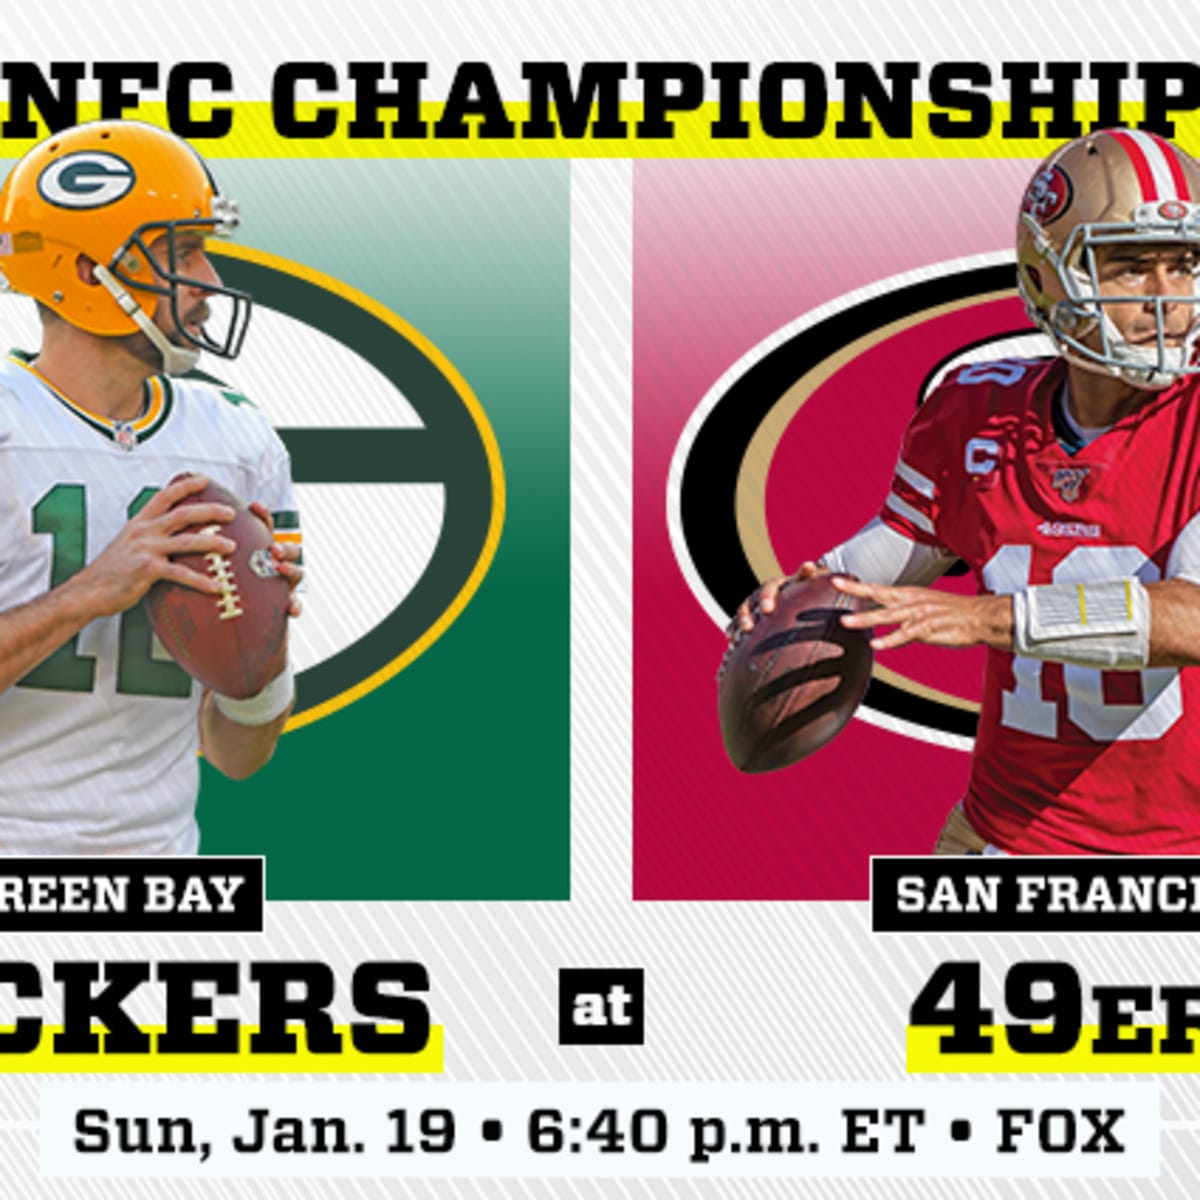 green bay packers nfc championships